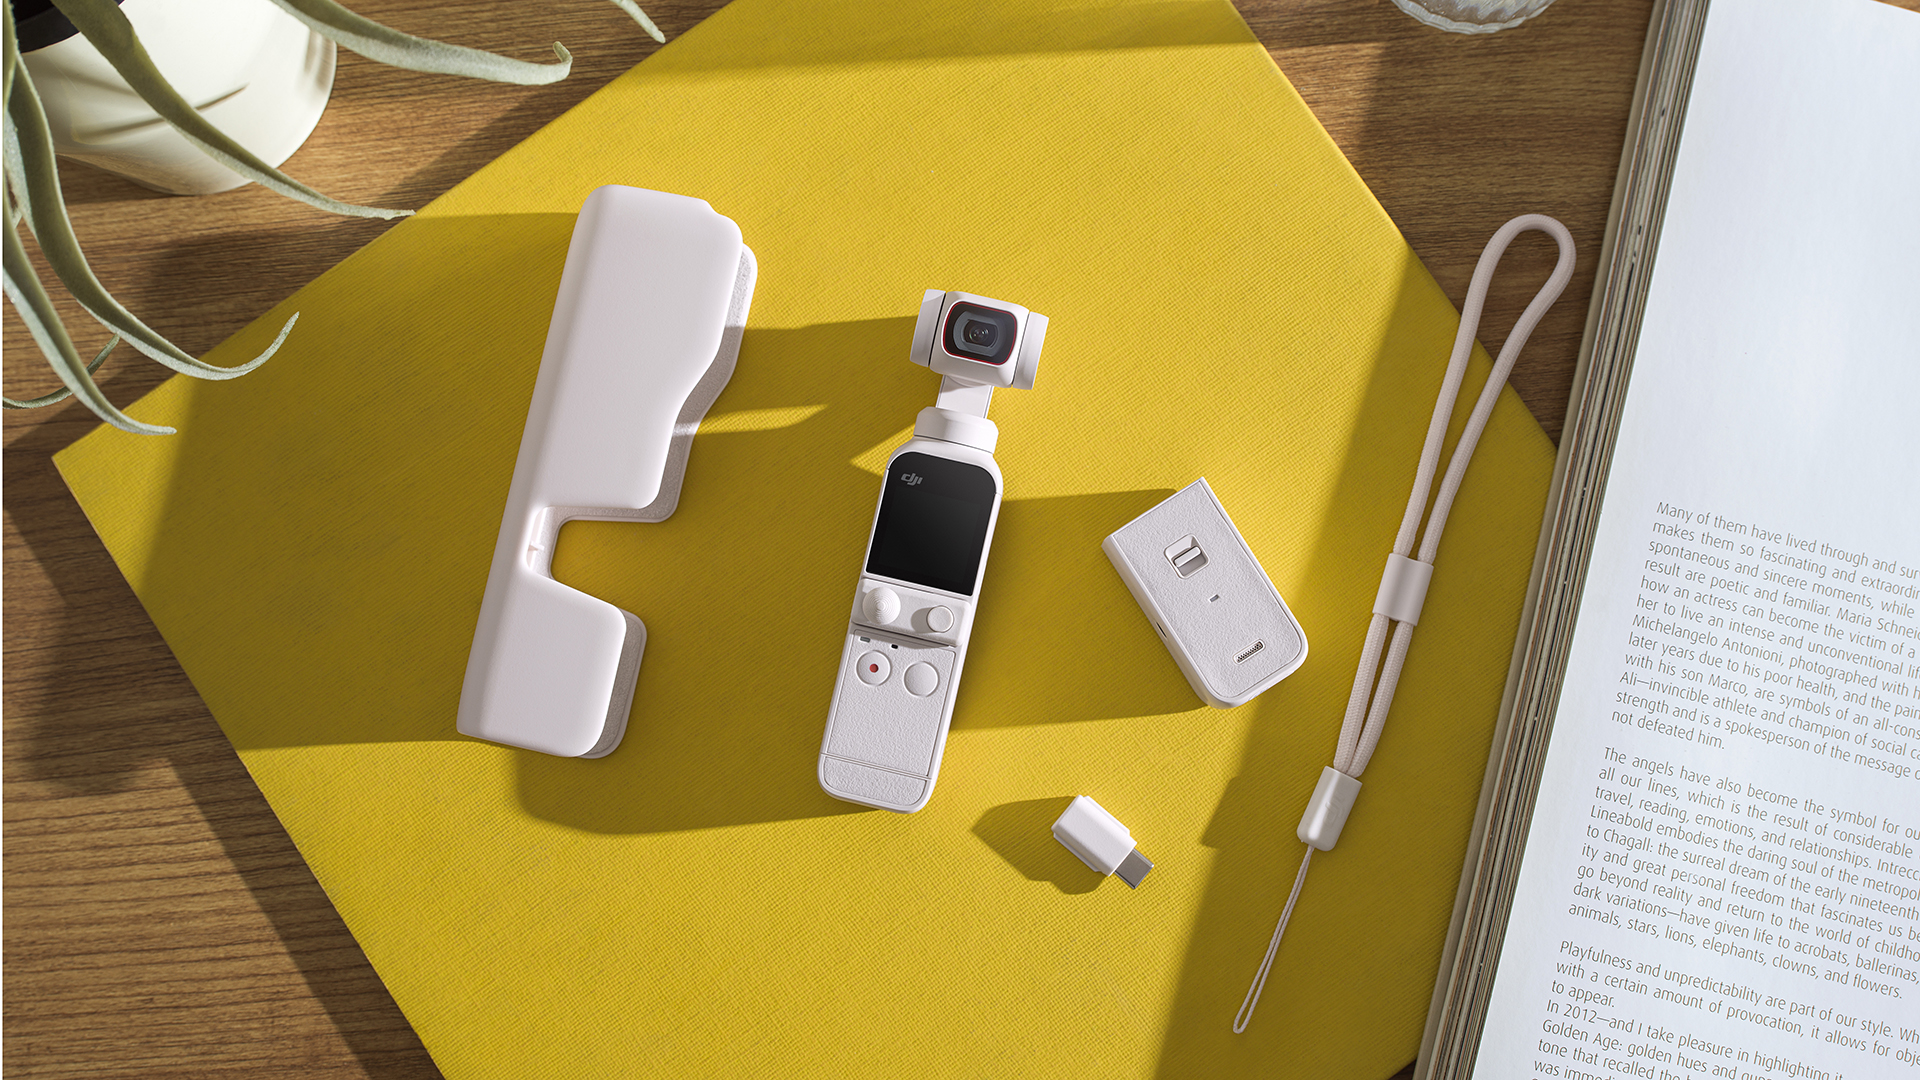 DJI Pocket 2 now comes in Sunset White color - Android Authority